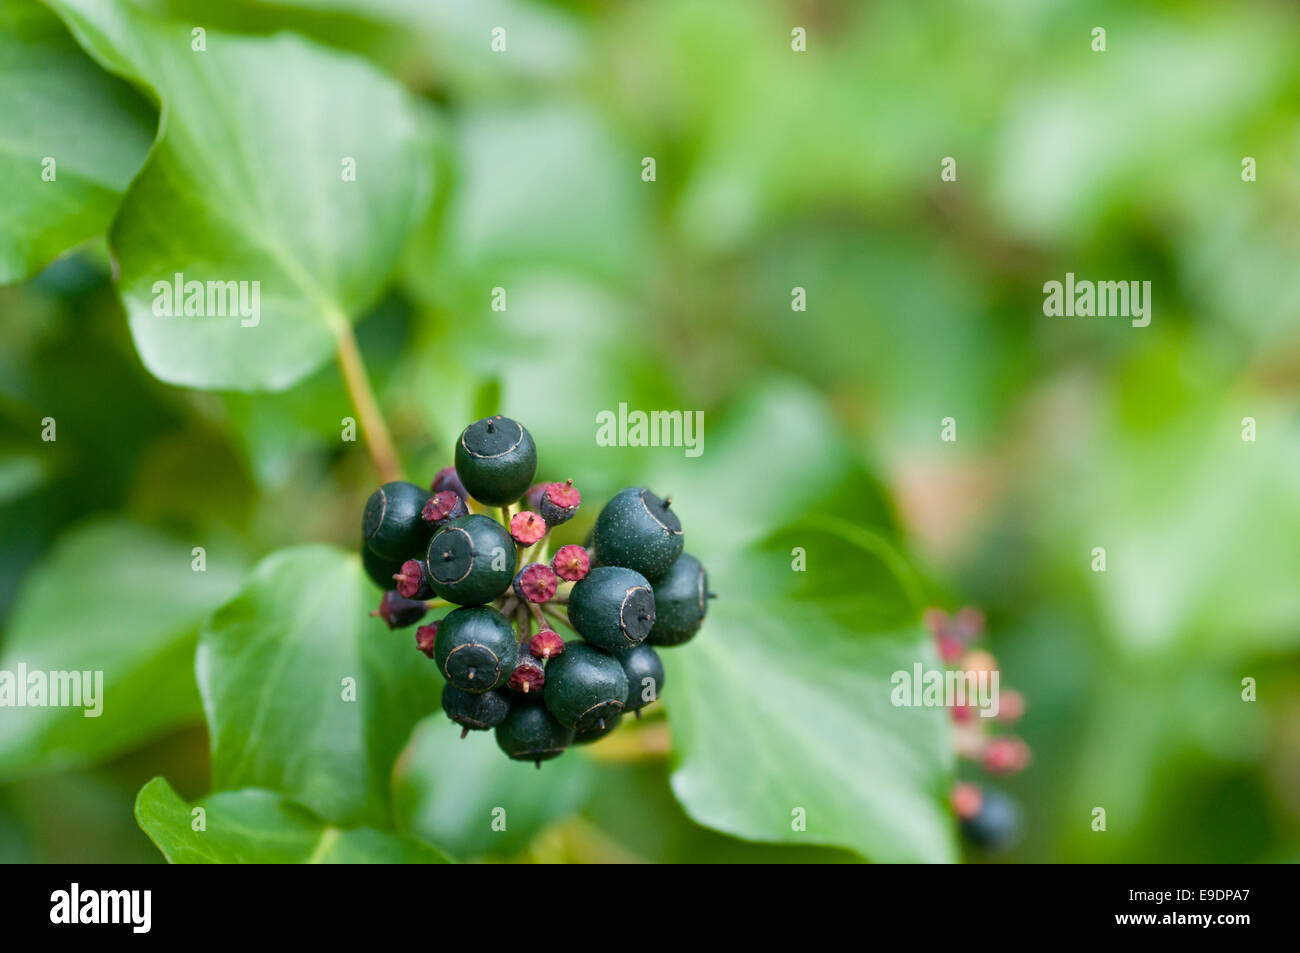 A cluster of Ivy berries against a back of green foliage Stock Photo